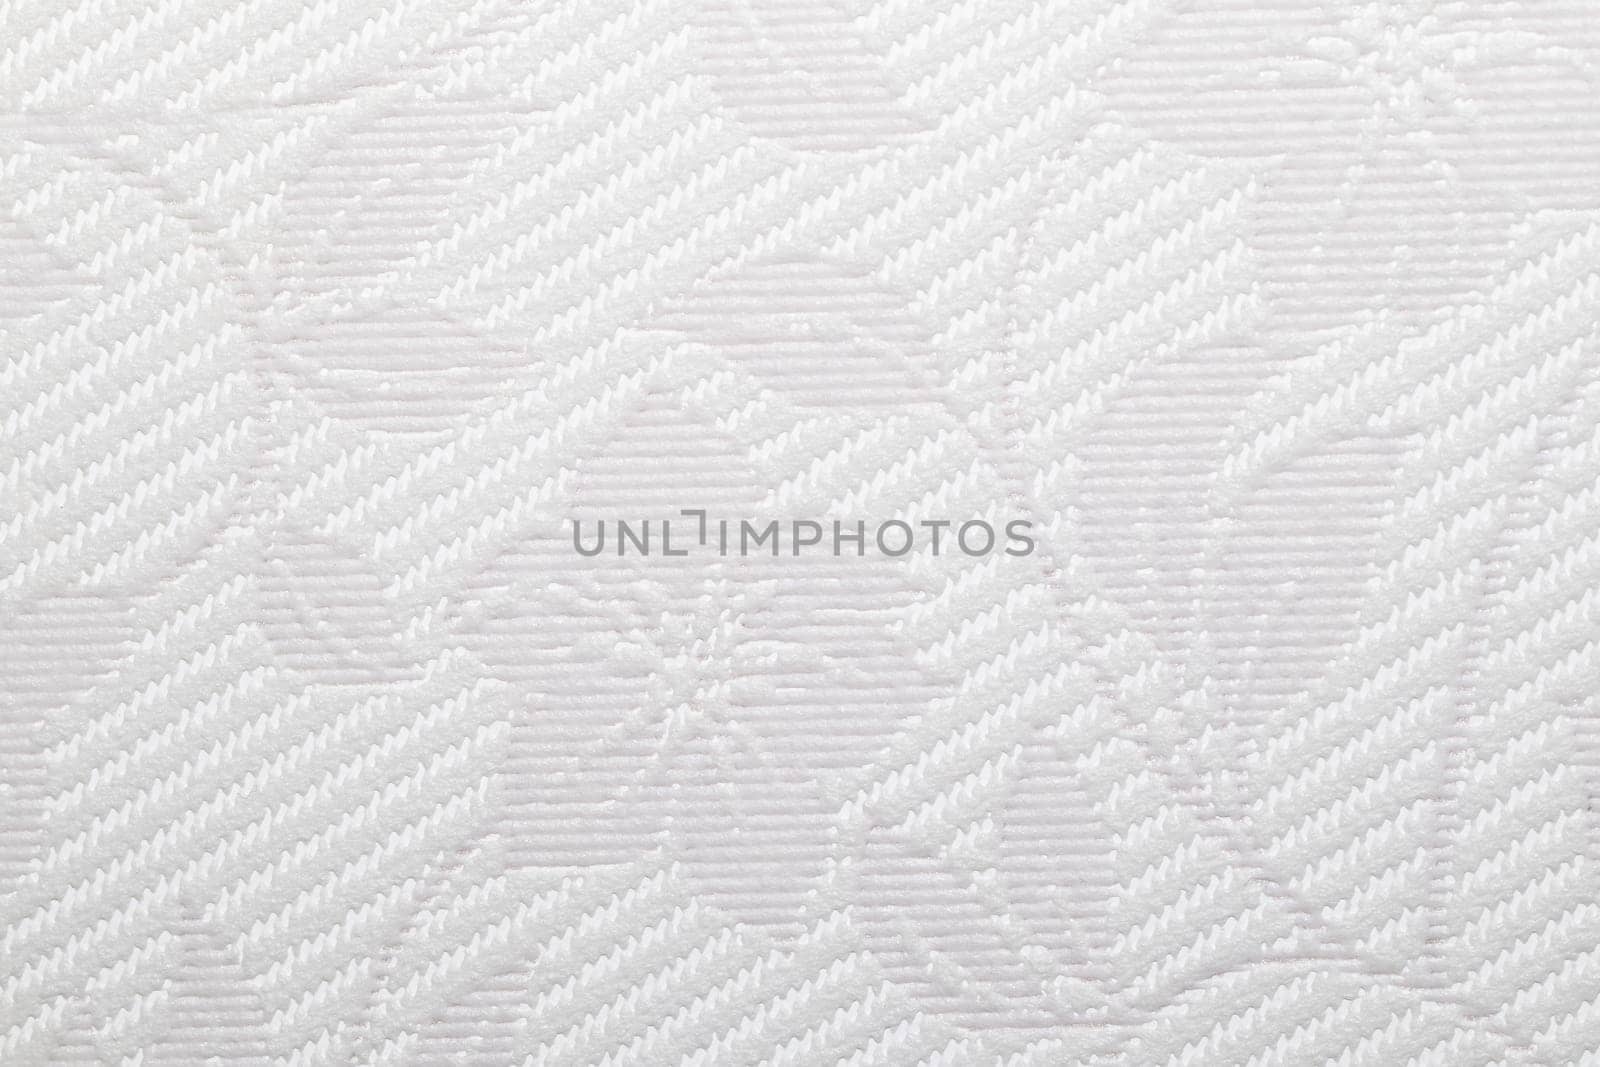 This image features a detailed close-up of a light gray textured vinyl wallpapers showcasing a intricate diagonal weave pattern with floral elements.